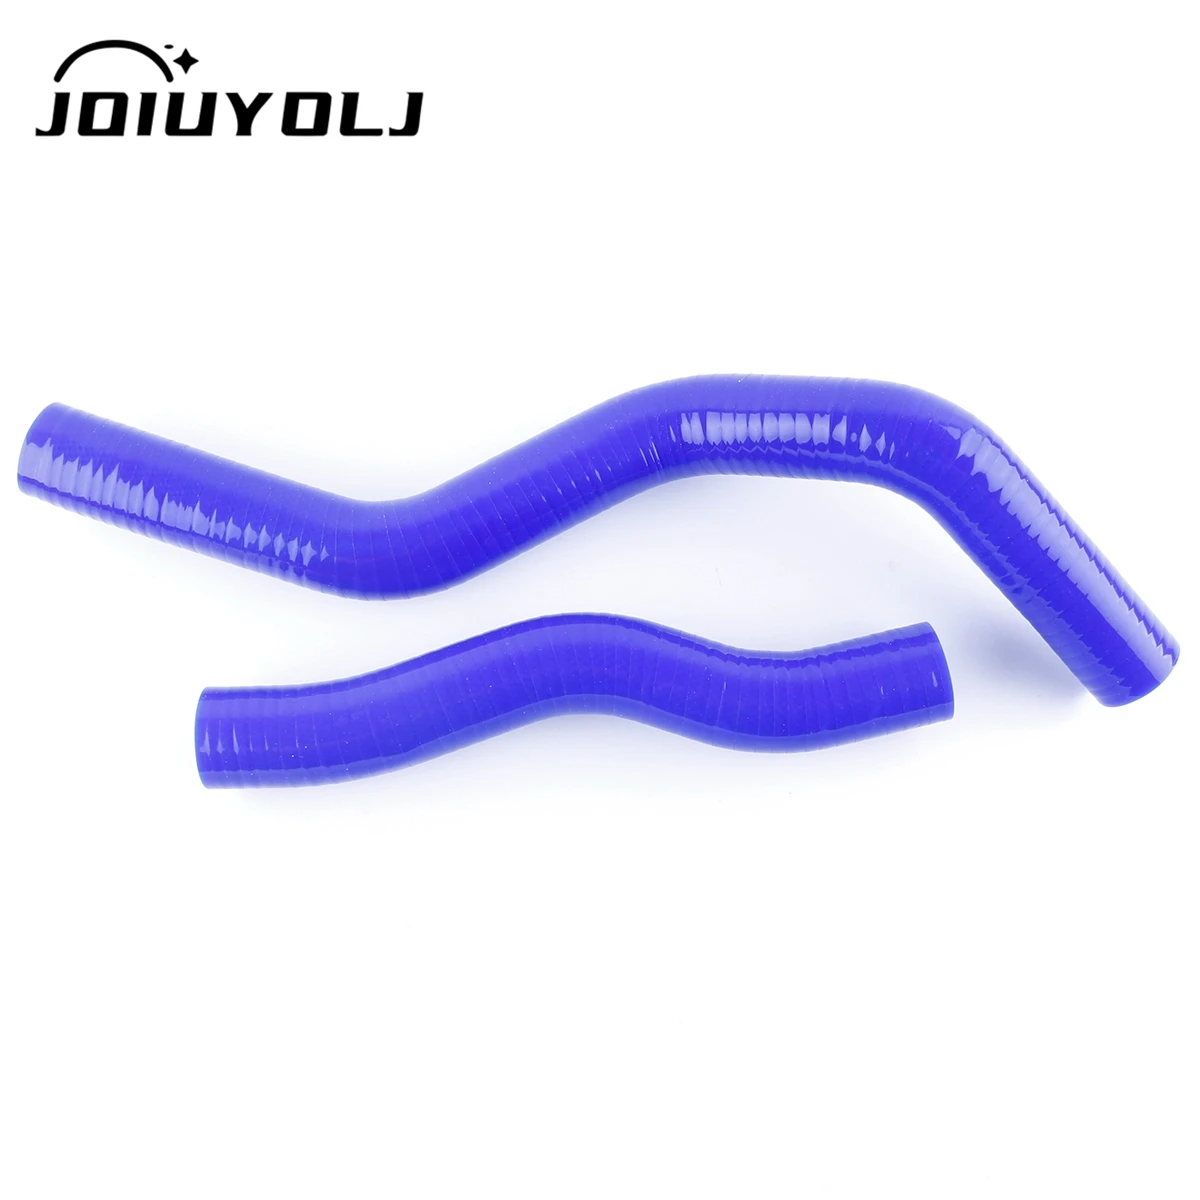 

SILICONE RADIATOR HOSE For CIVIC FD1 DX/EX/LX/SI R18A K20Z/ACURA RSX 1.8L/2.0L 2006 2007 2008 2009 2010 2011